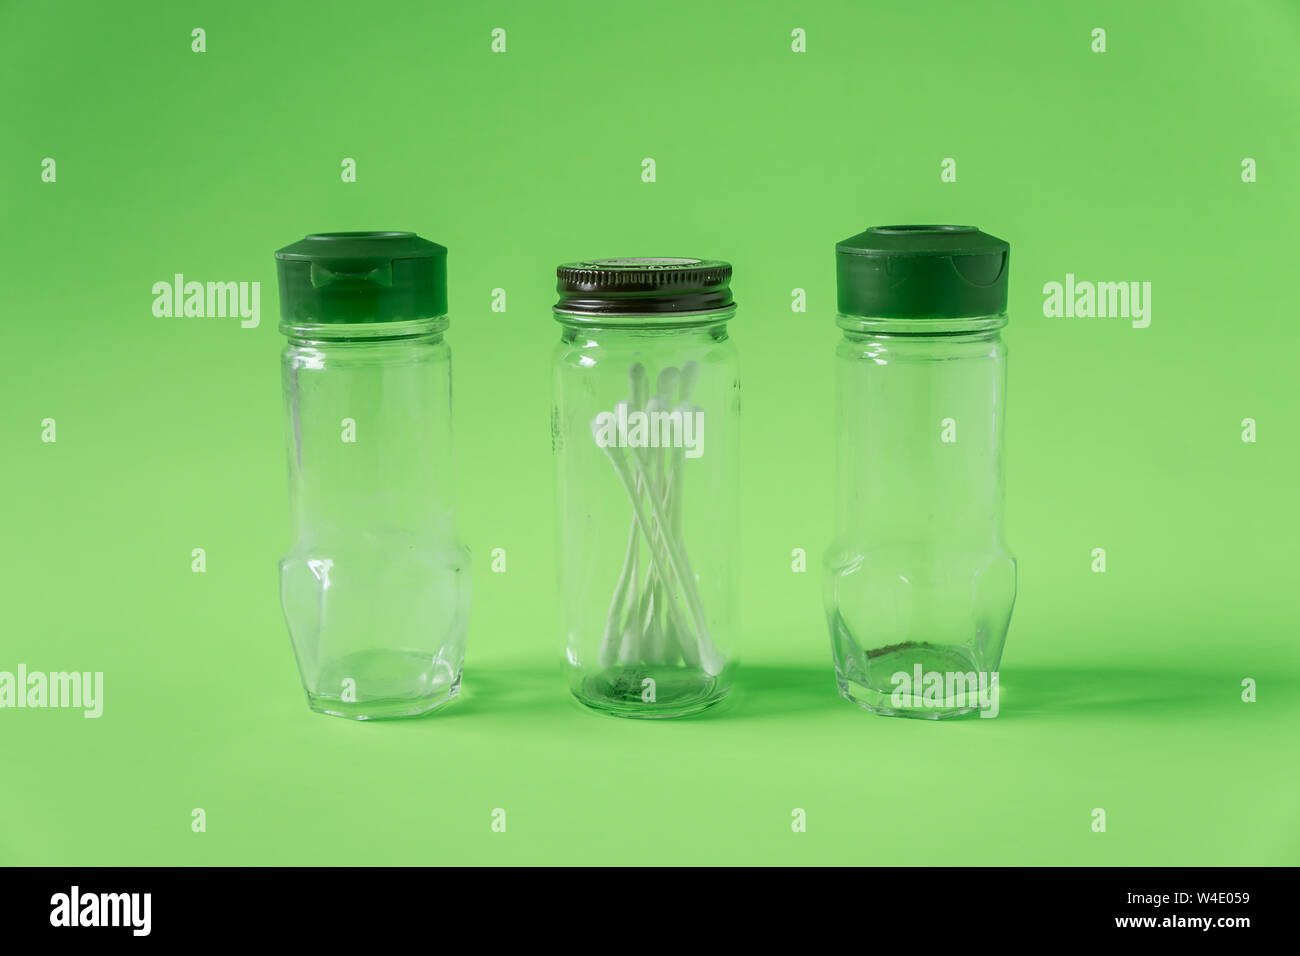 https://c8.alamy.com/comp/W4E059/3-glass-spice-jars-on-lime-green-background-with-blank-empty-room-space-for-text-or-copy-three-kitchen-bottles-recycled-and-reused-to-store-cotton-sw-W4E059.jpg